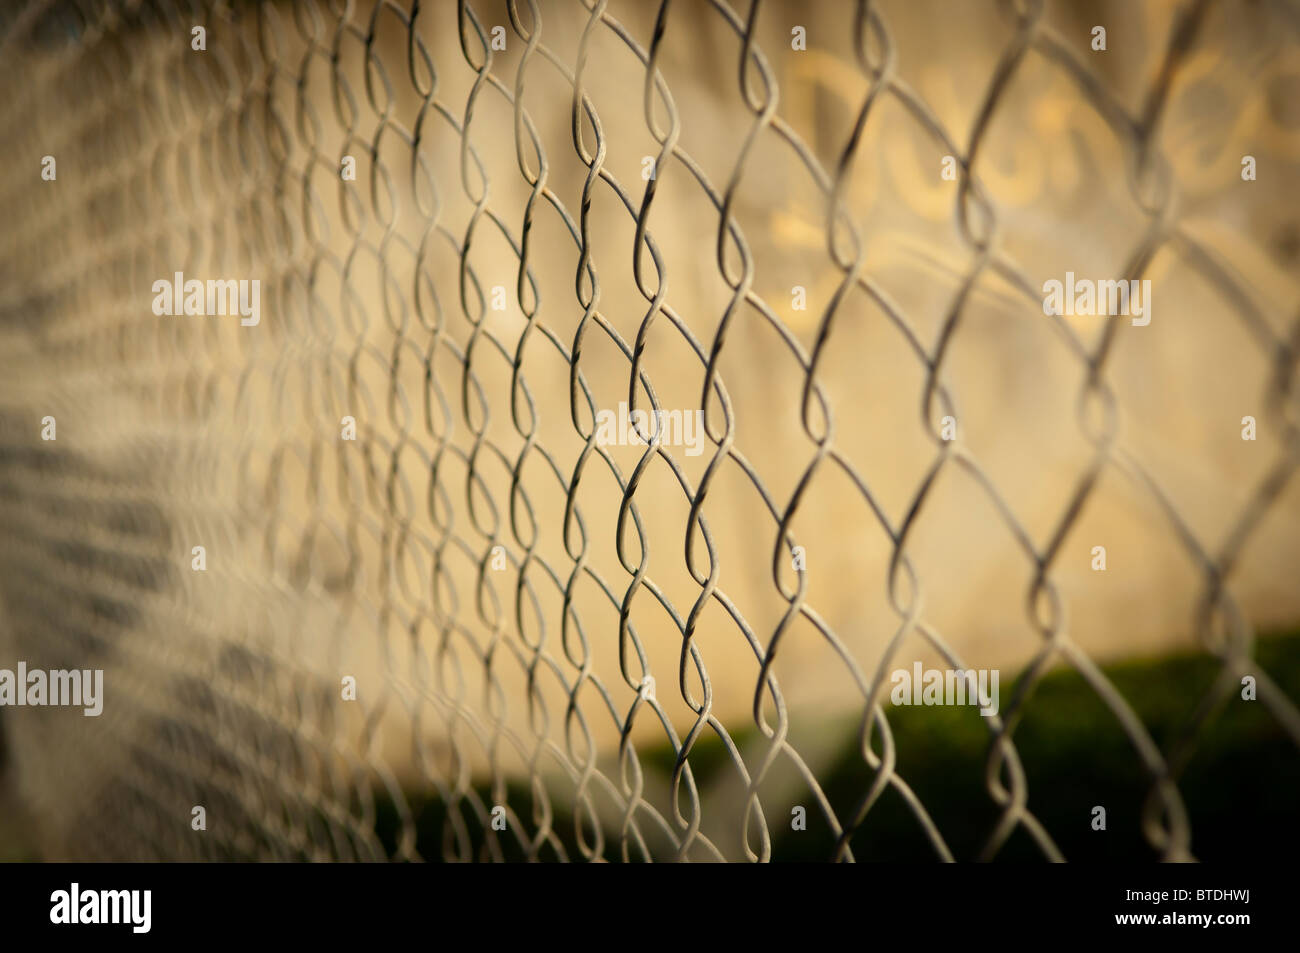 Wire fence (cyclone fencing) in repeating patterns Stock Photo